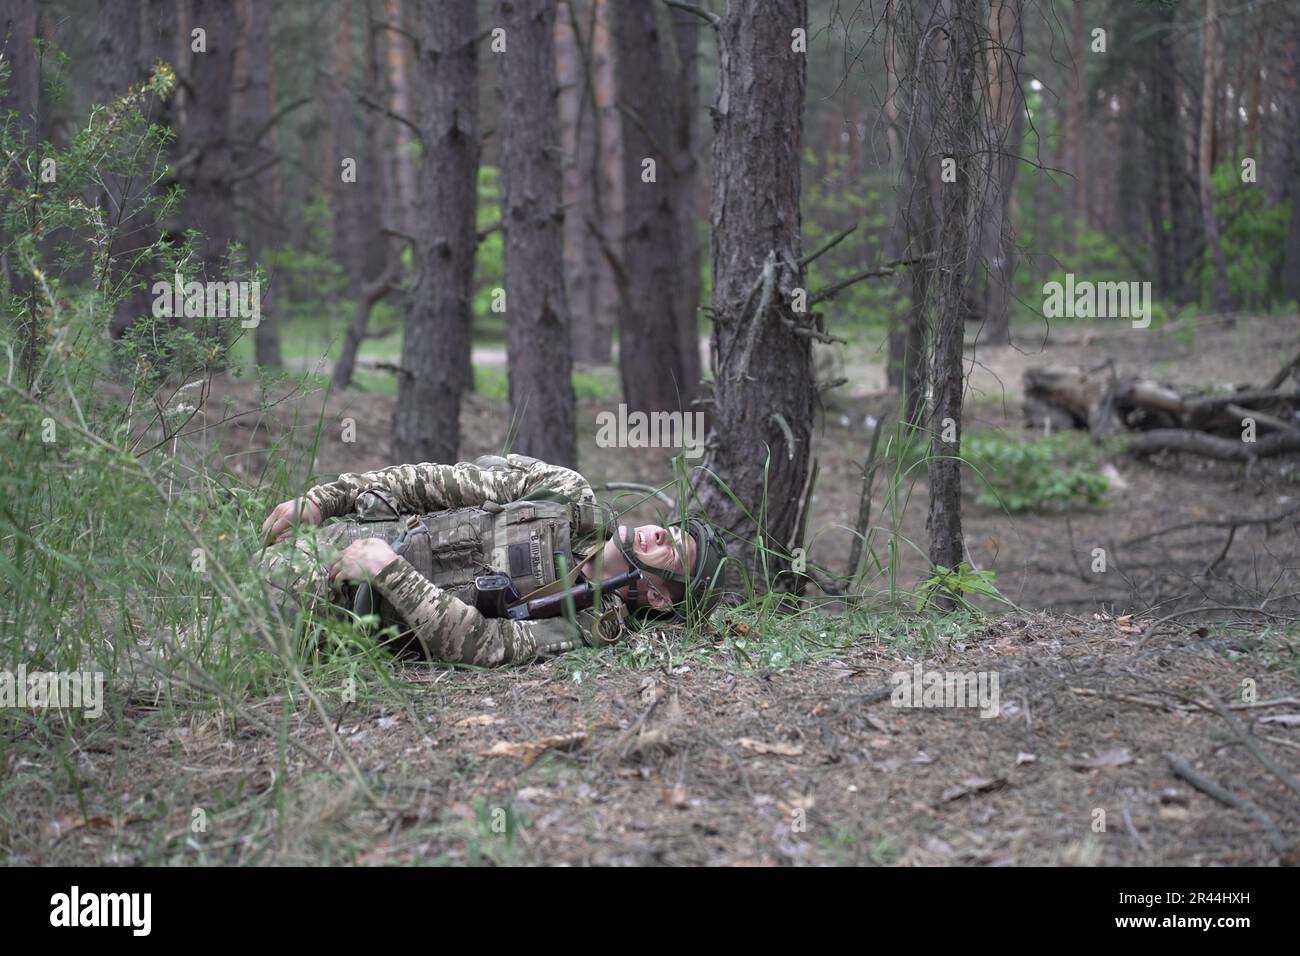 Soldiers of UkraineÕs Armed Forces Regular Infantry recieve intensive medical training from volunteers of the Prytula Foundation. Trainers from the foundation learn from experts in NATO-style TCCC Western medical training. Soldiers at the large military base simulate frontline conditions, living in the forest and digging trenches over long periods of time. Stock Photo